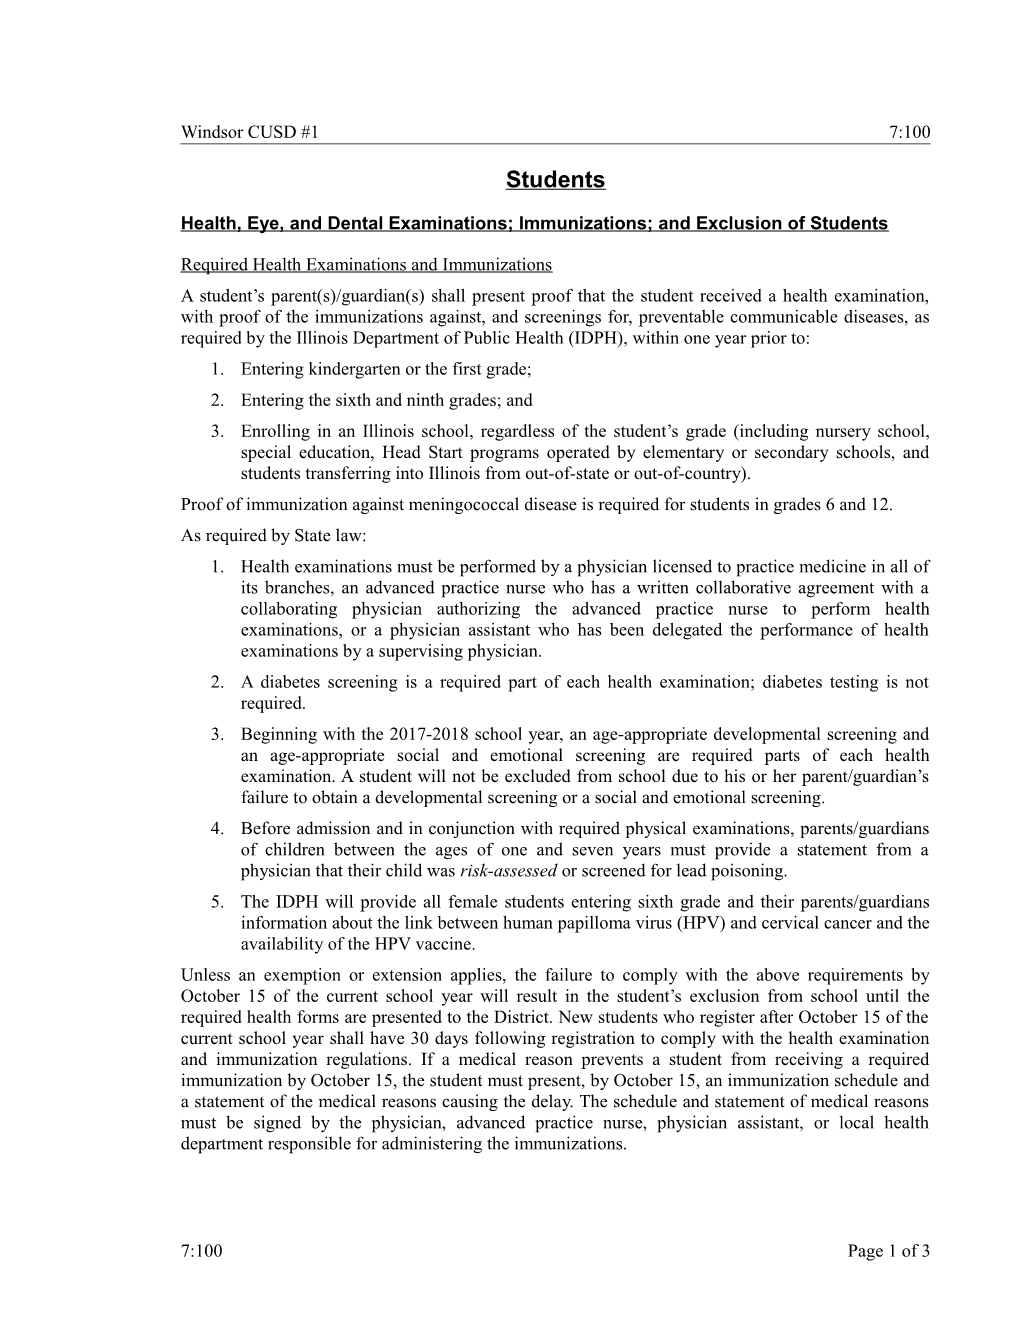 Health, Eye,And Dentalexaminations; Immunizations; and Exclusion of Students